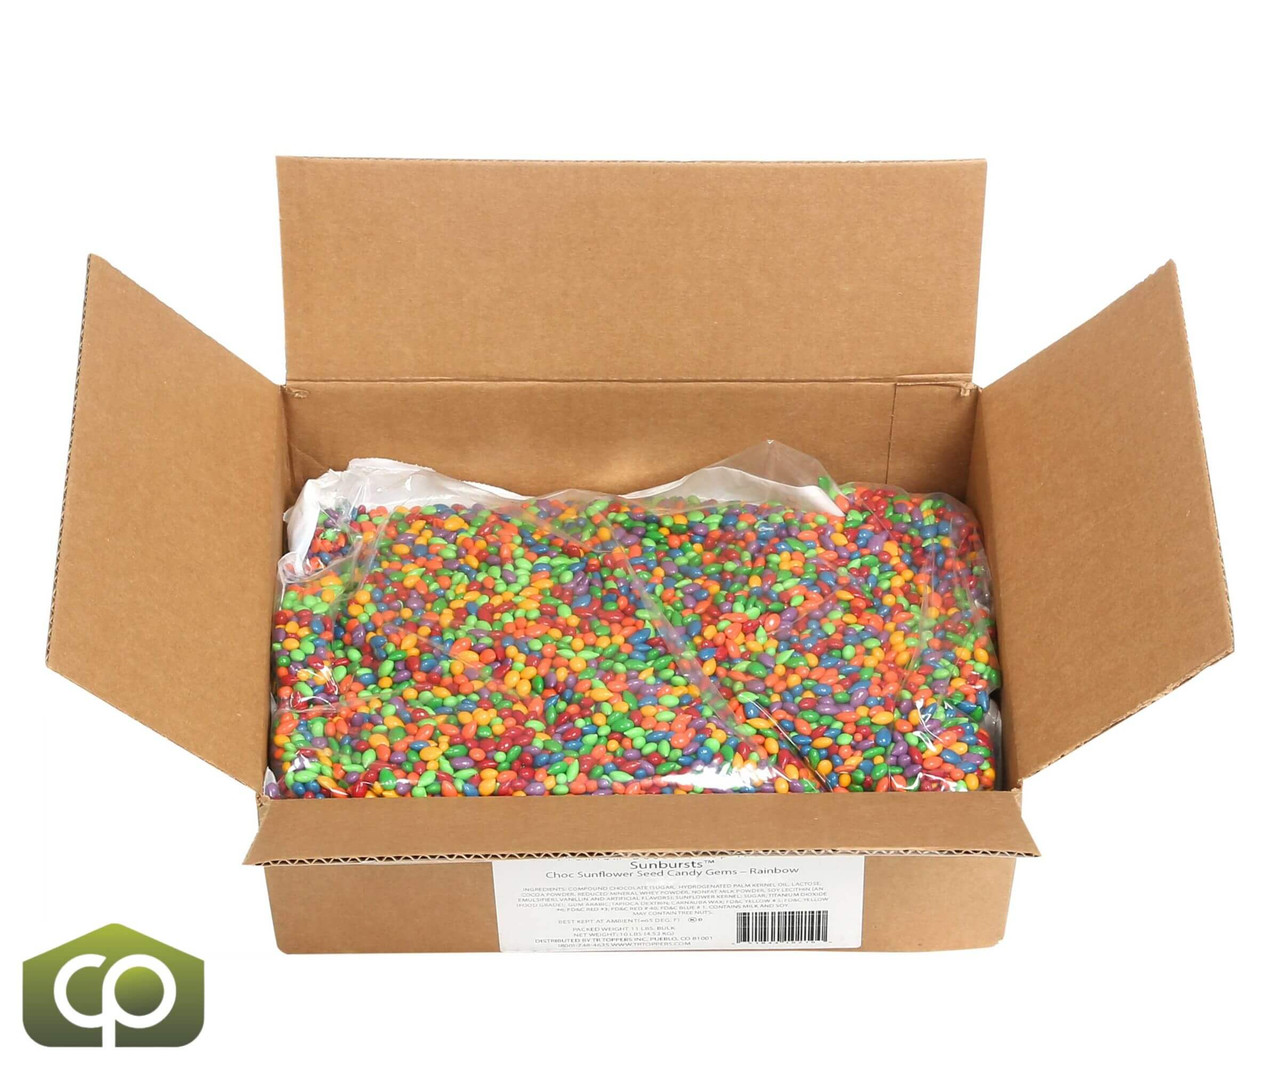 TOPPERS Chocolate Covered Sunflower Seed Candy Gems Topping - 5 lb - Chicken Pieces